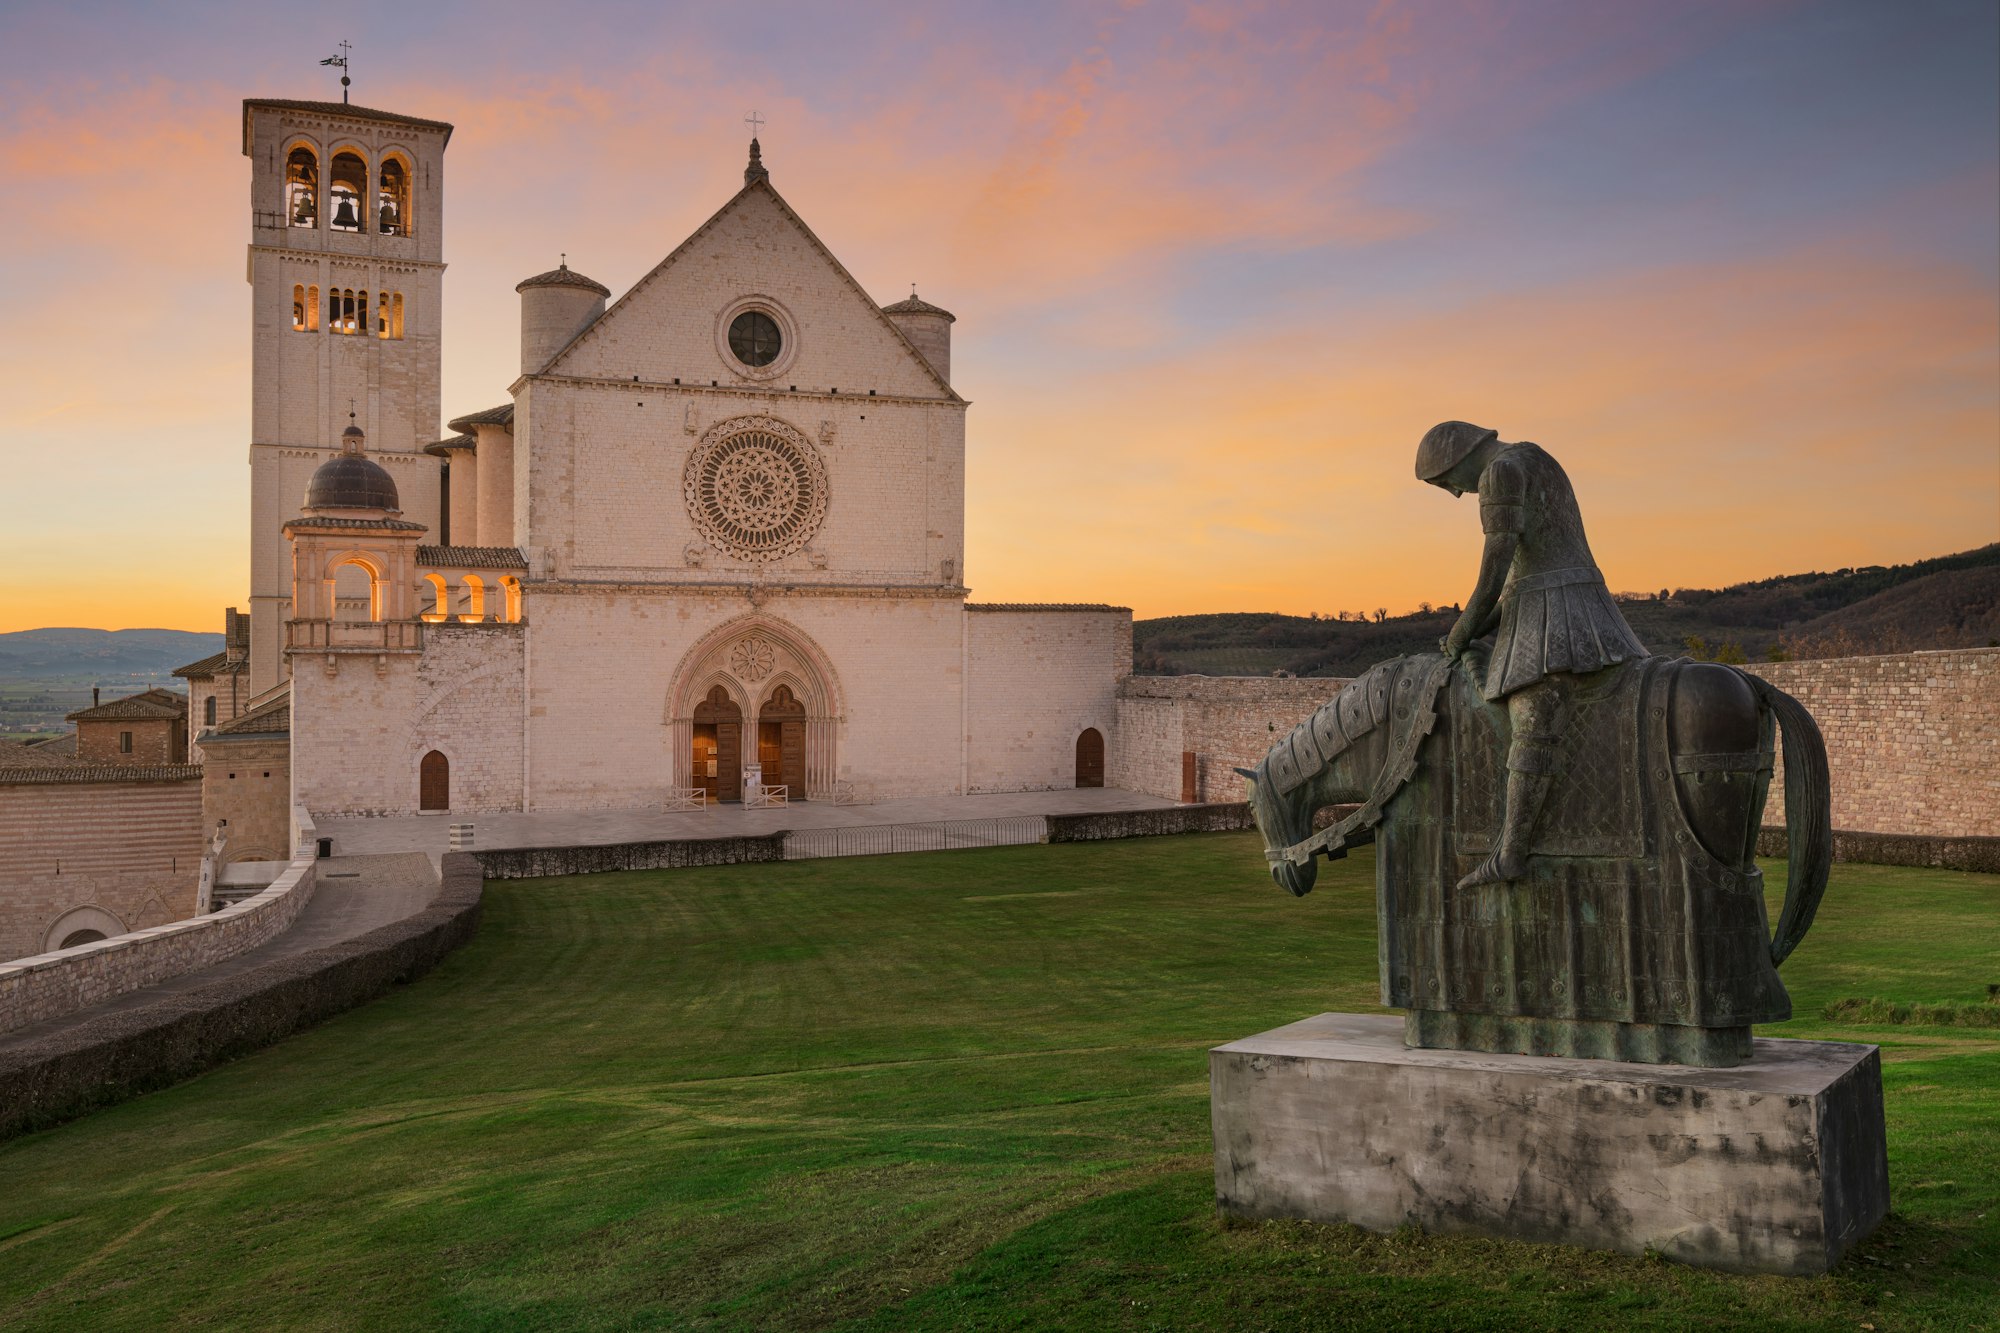 Assisi, Italy with the Basilica of Saint Francis of Assisi